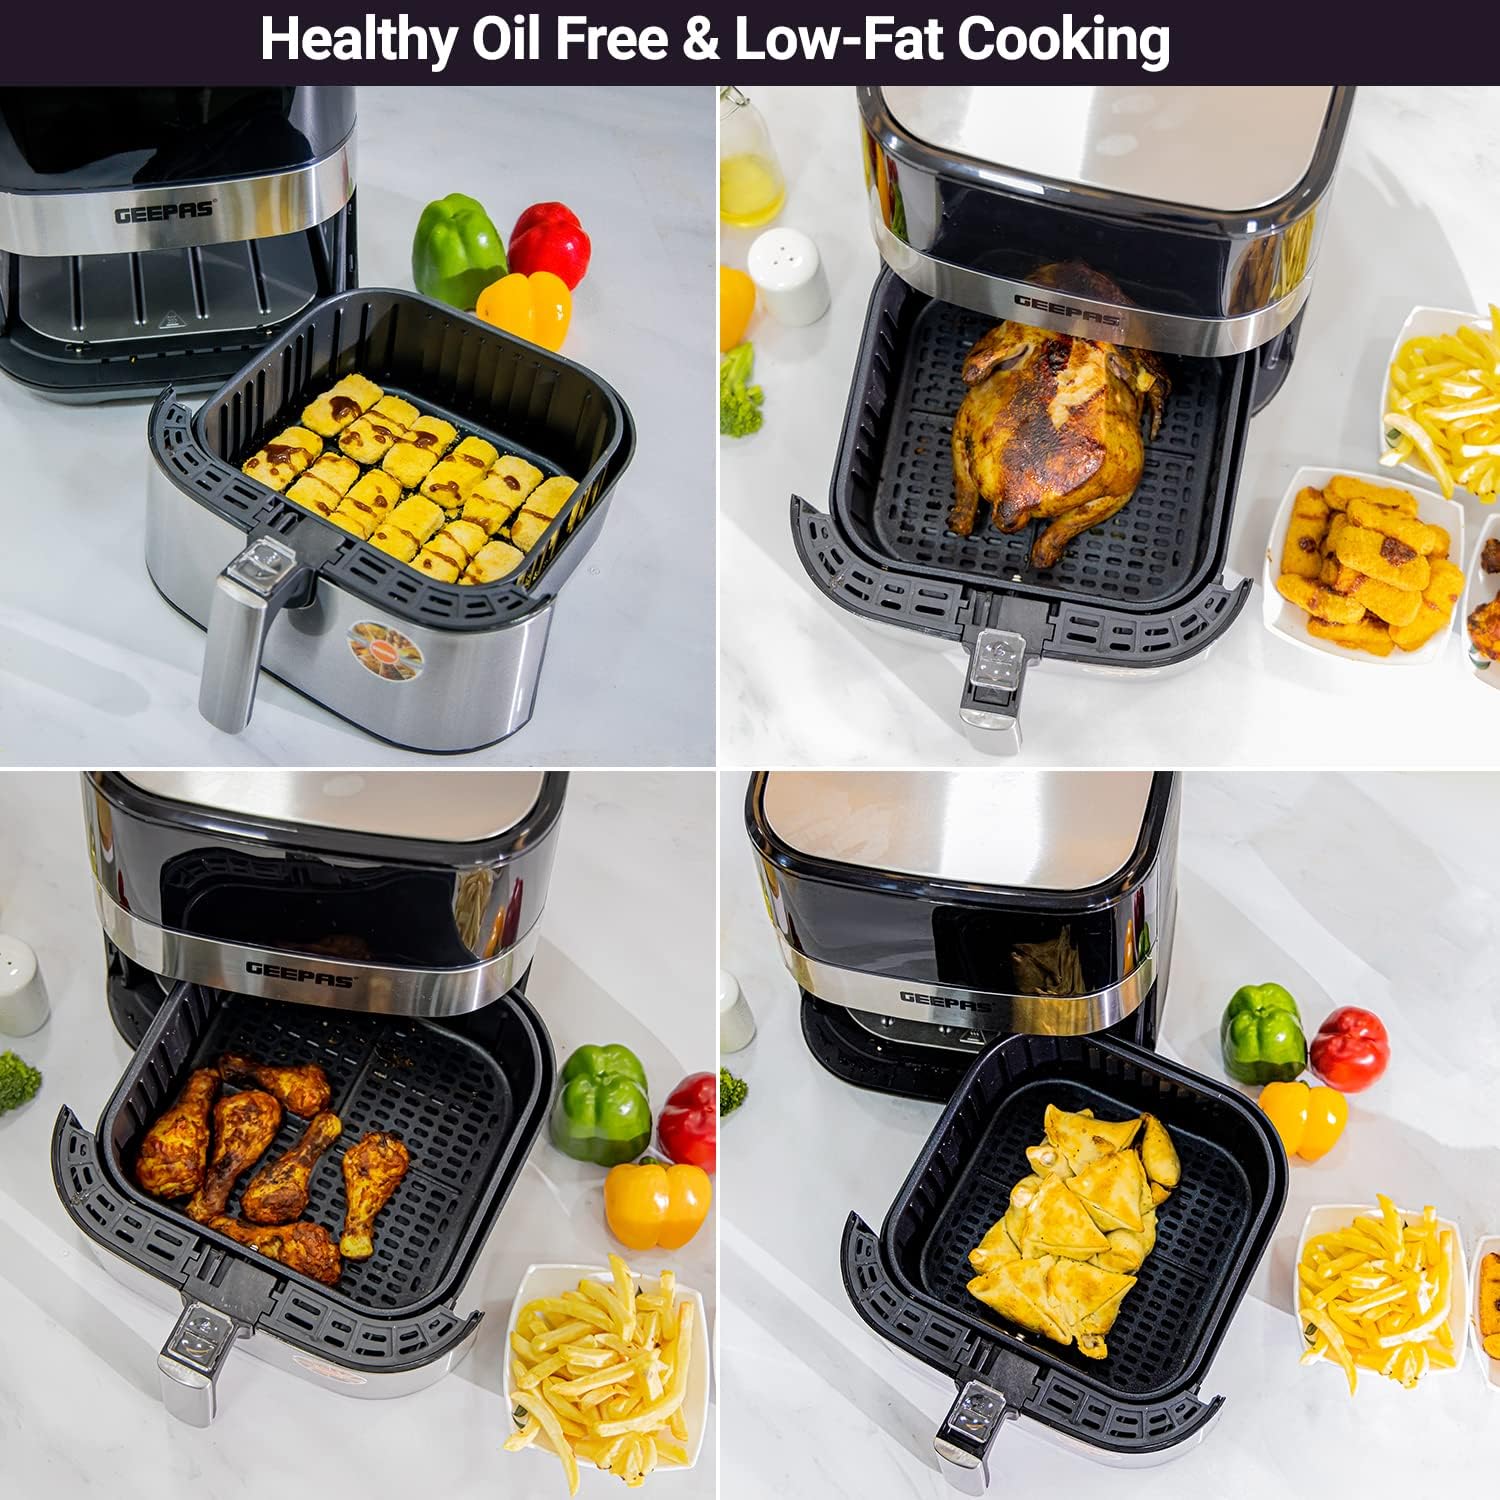 Geepas GAF37510 Electric Air Fryer 5 Liter Digital Touch Screen & Preheat, 60 Minute Timer, Led Display, Auto Shut Off